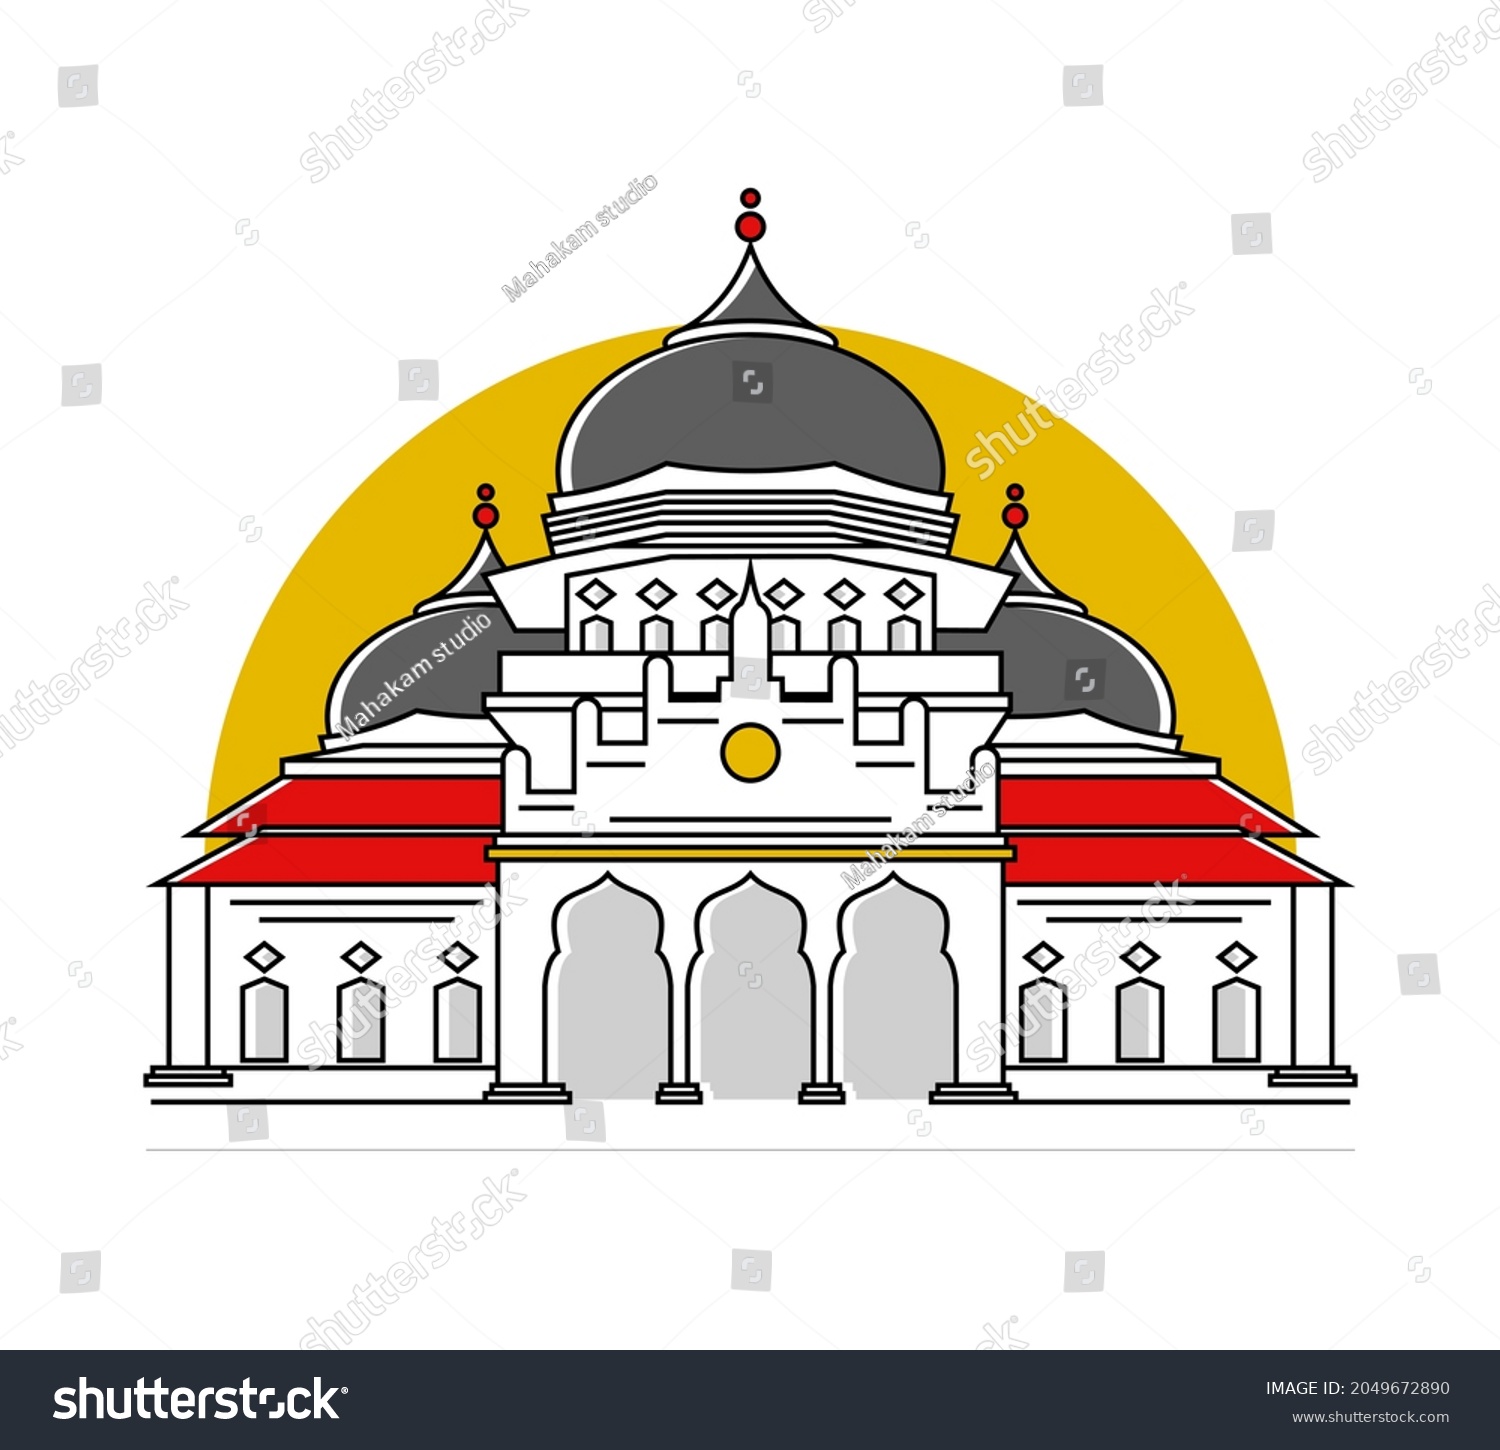 SVG of - Nusantara Mosque Project -

Naggroe Aceh Darussalam Capital Mosque  svg